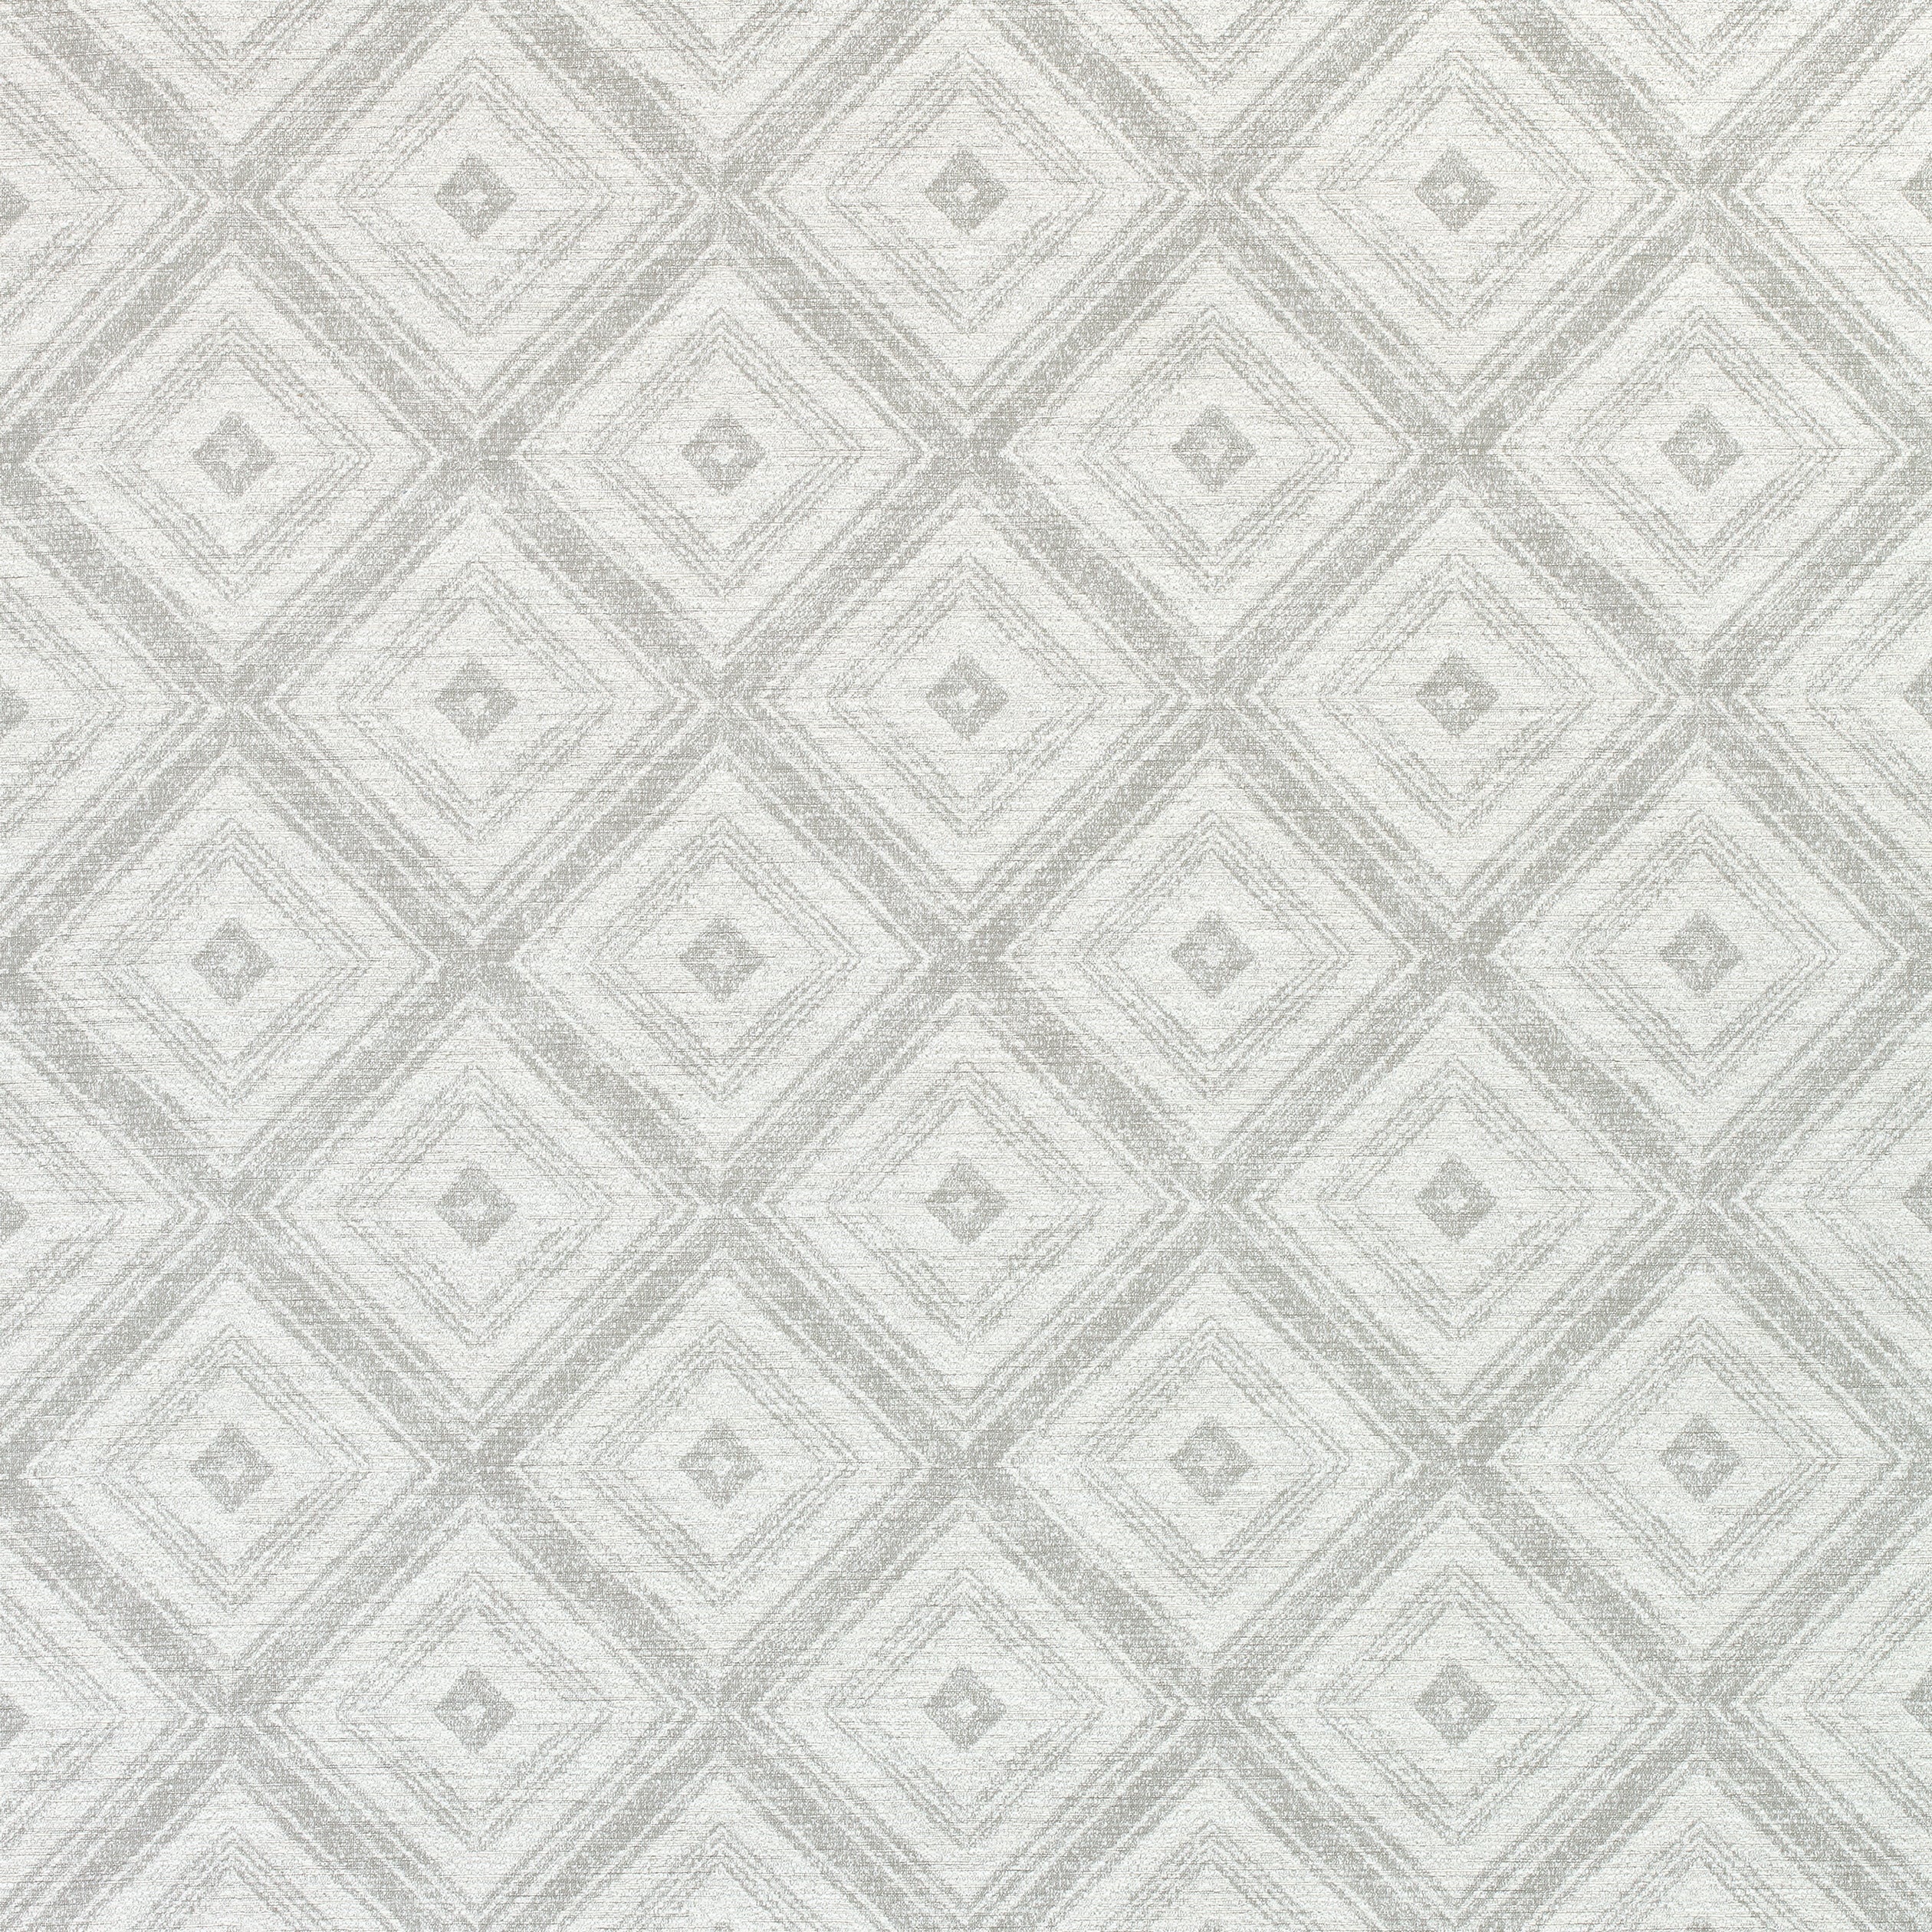 Ellison fabric in stone color - pattern number W789127 - by Thibaut in the Reverie collection